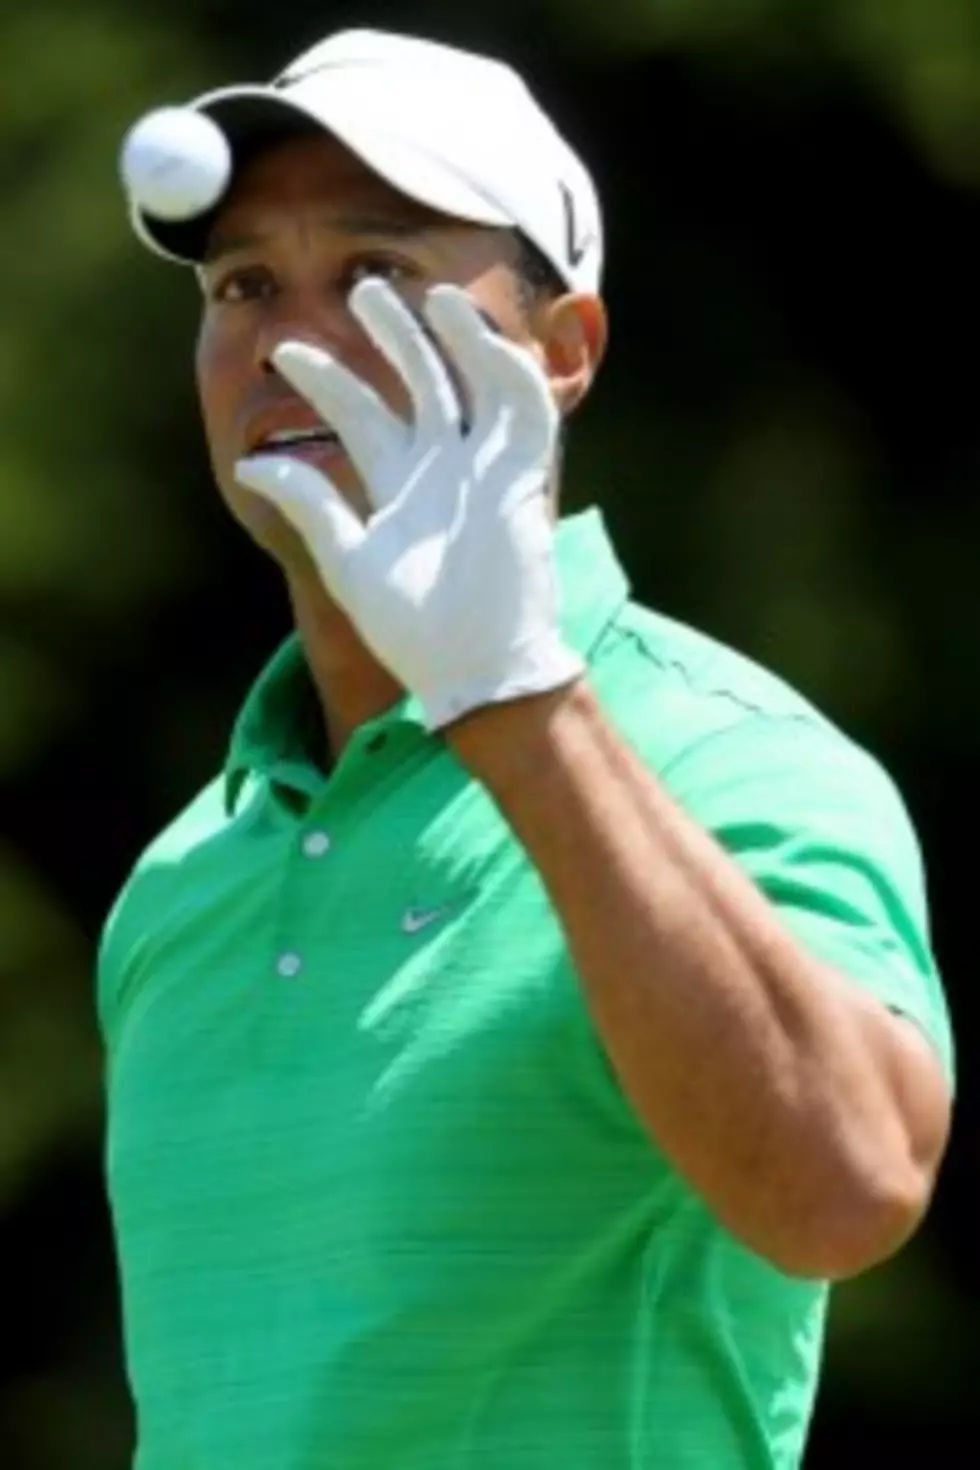 Tiger Woods Knocked Out as Top Earning Athlete by Floyd Mayweather Jr. on Forbes List